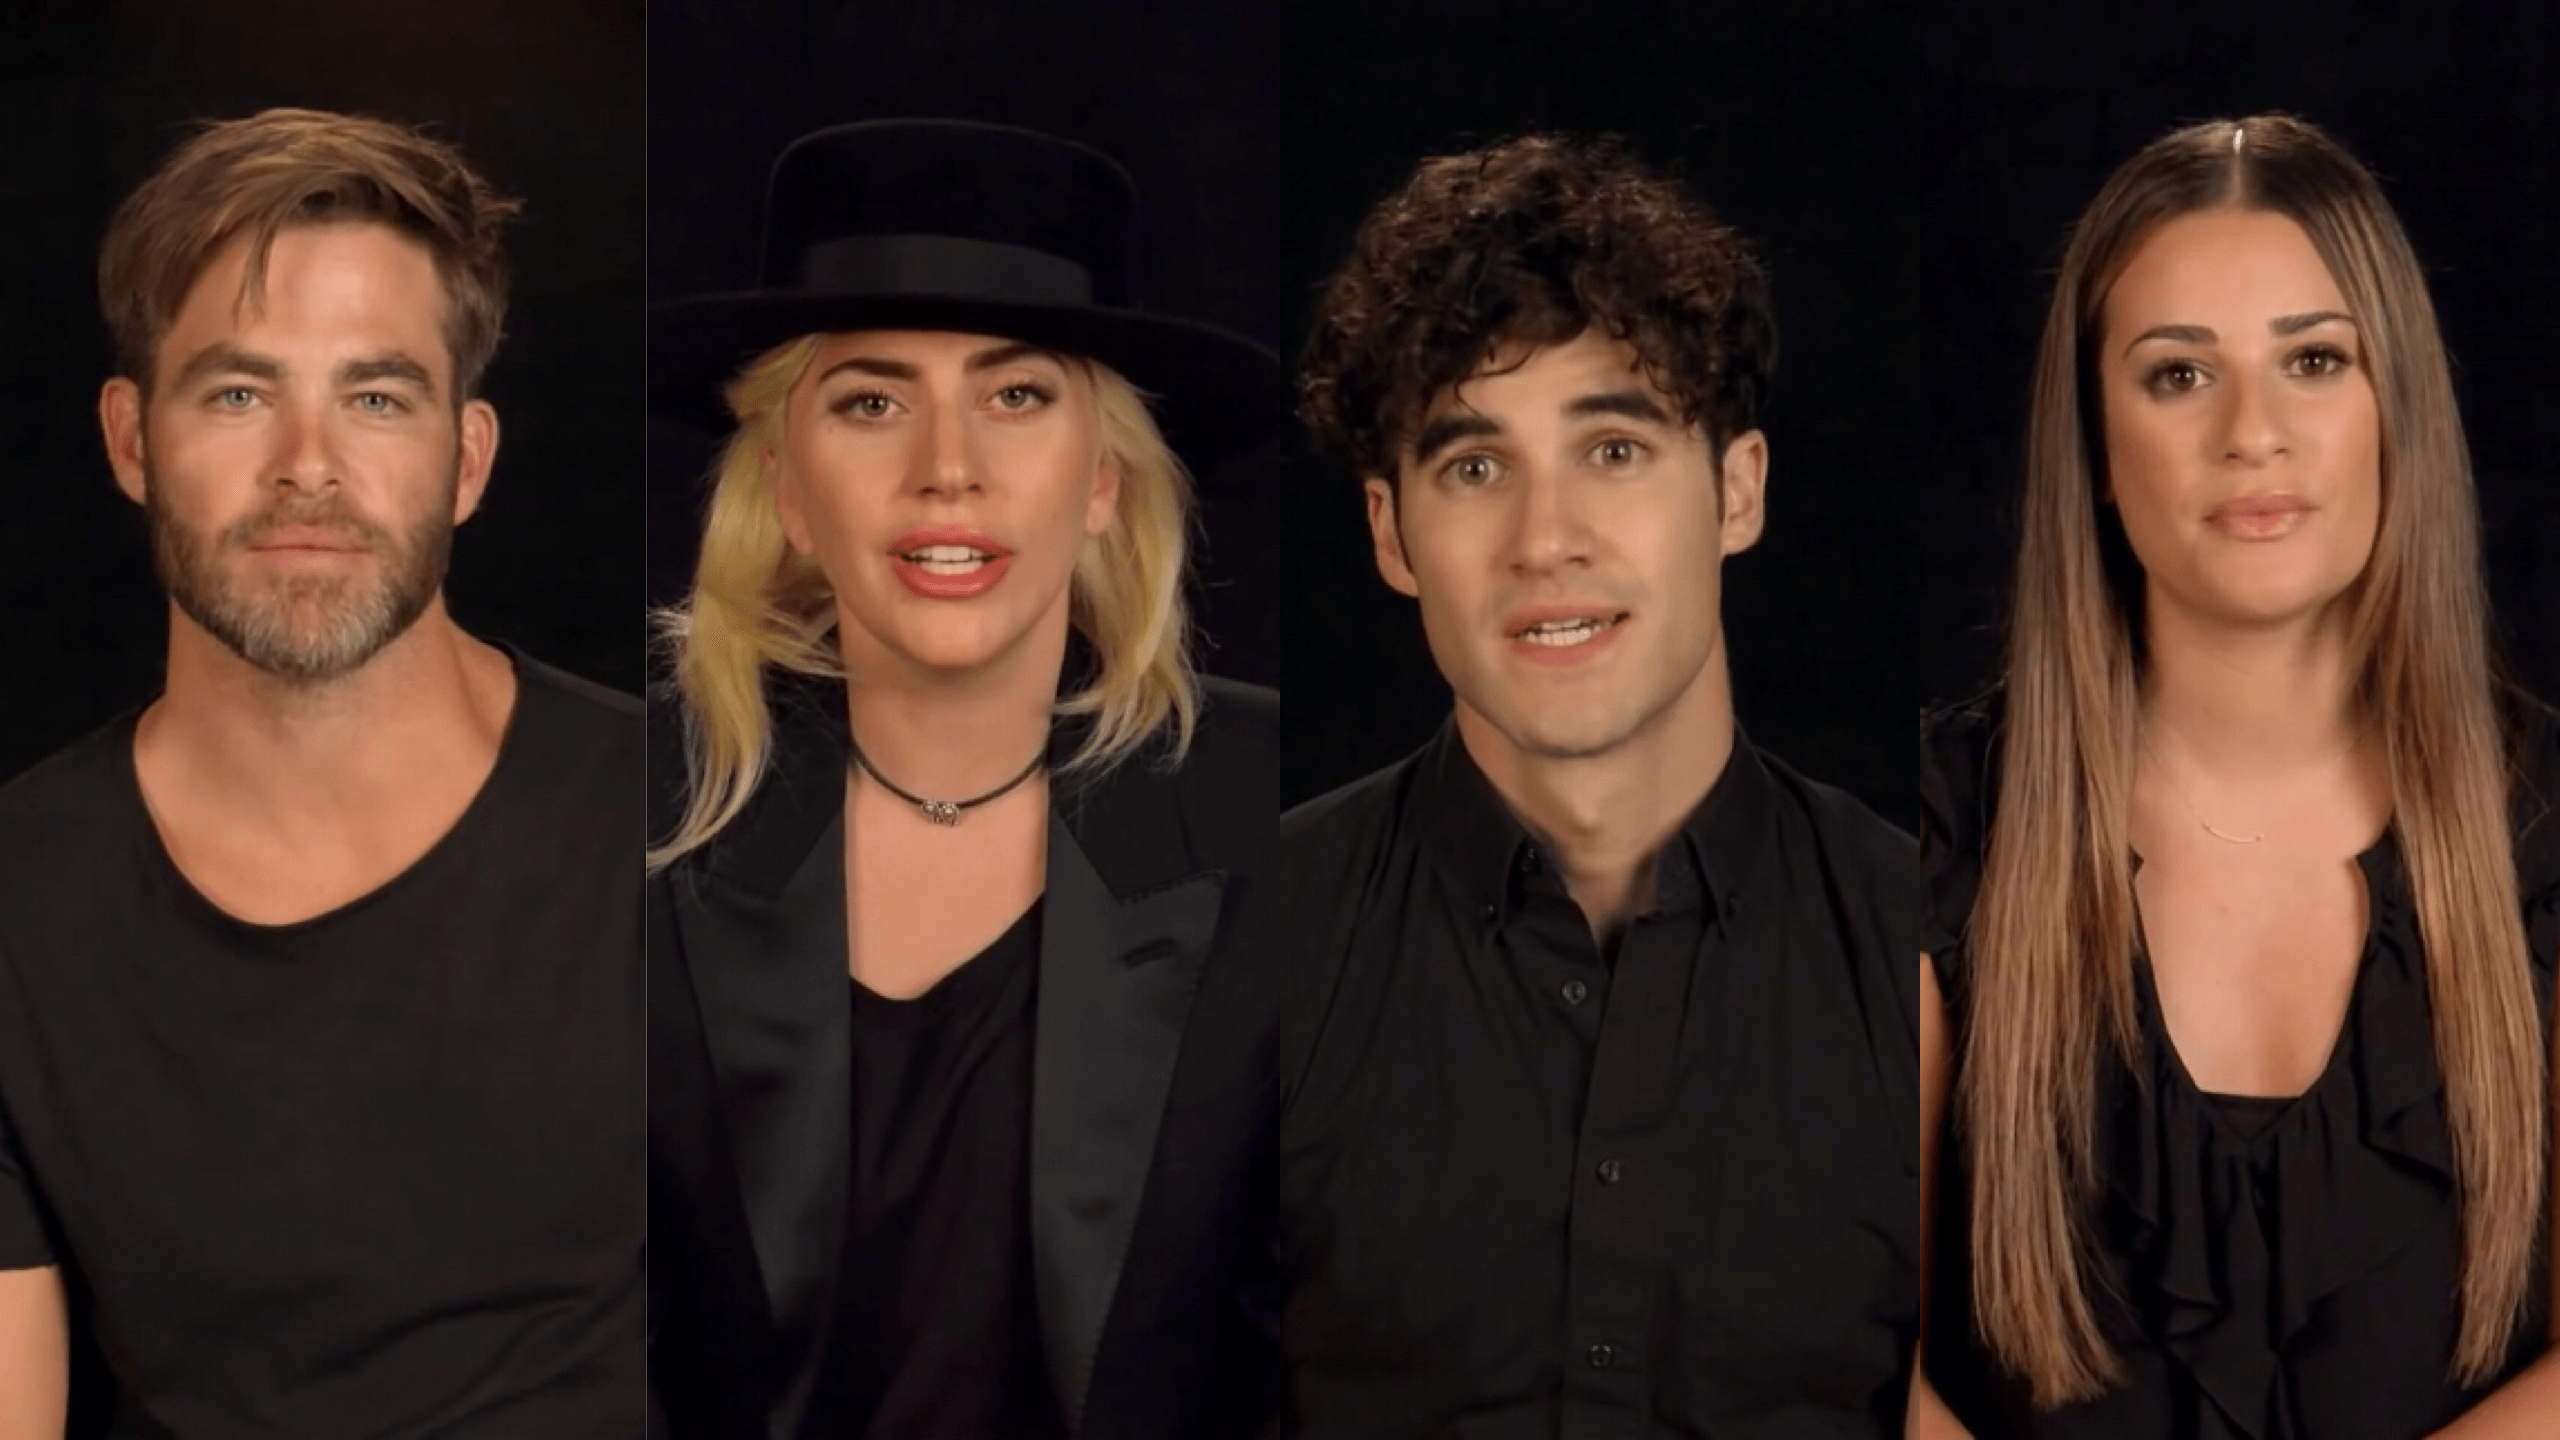 WATCH: Stars honor the 49 Orlando shooting victims in moving tribute